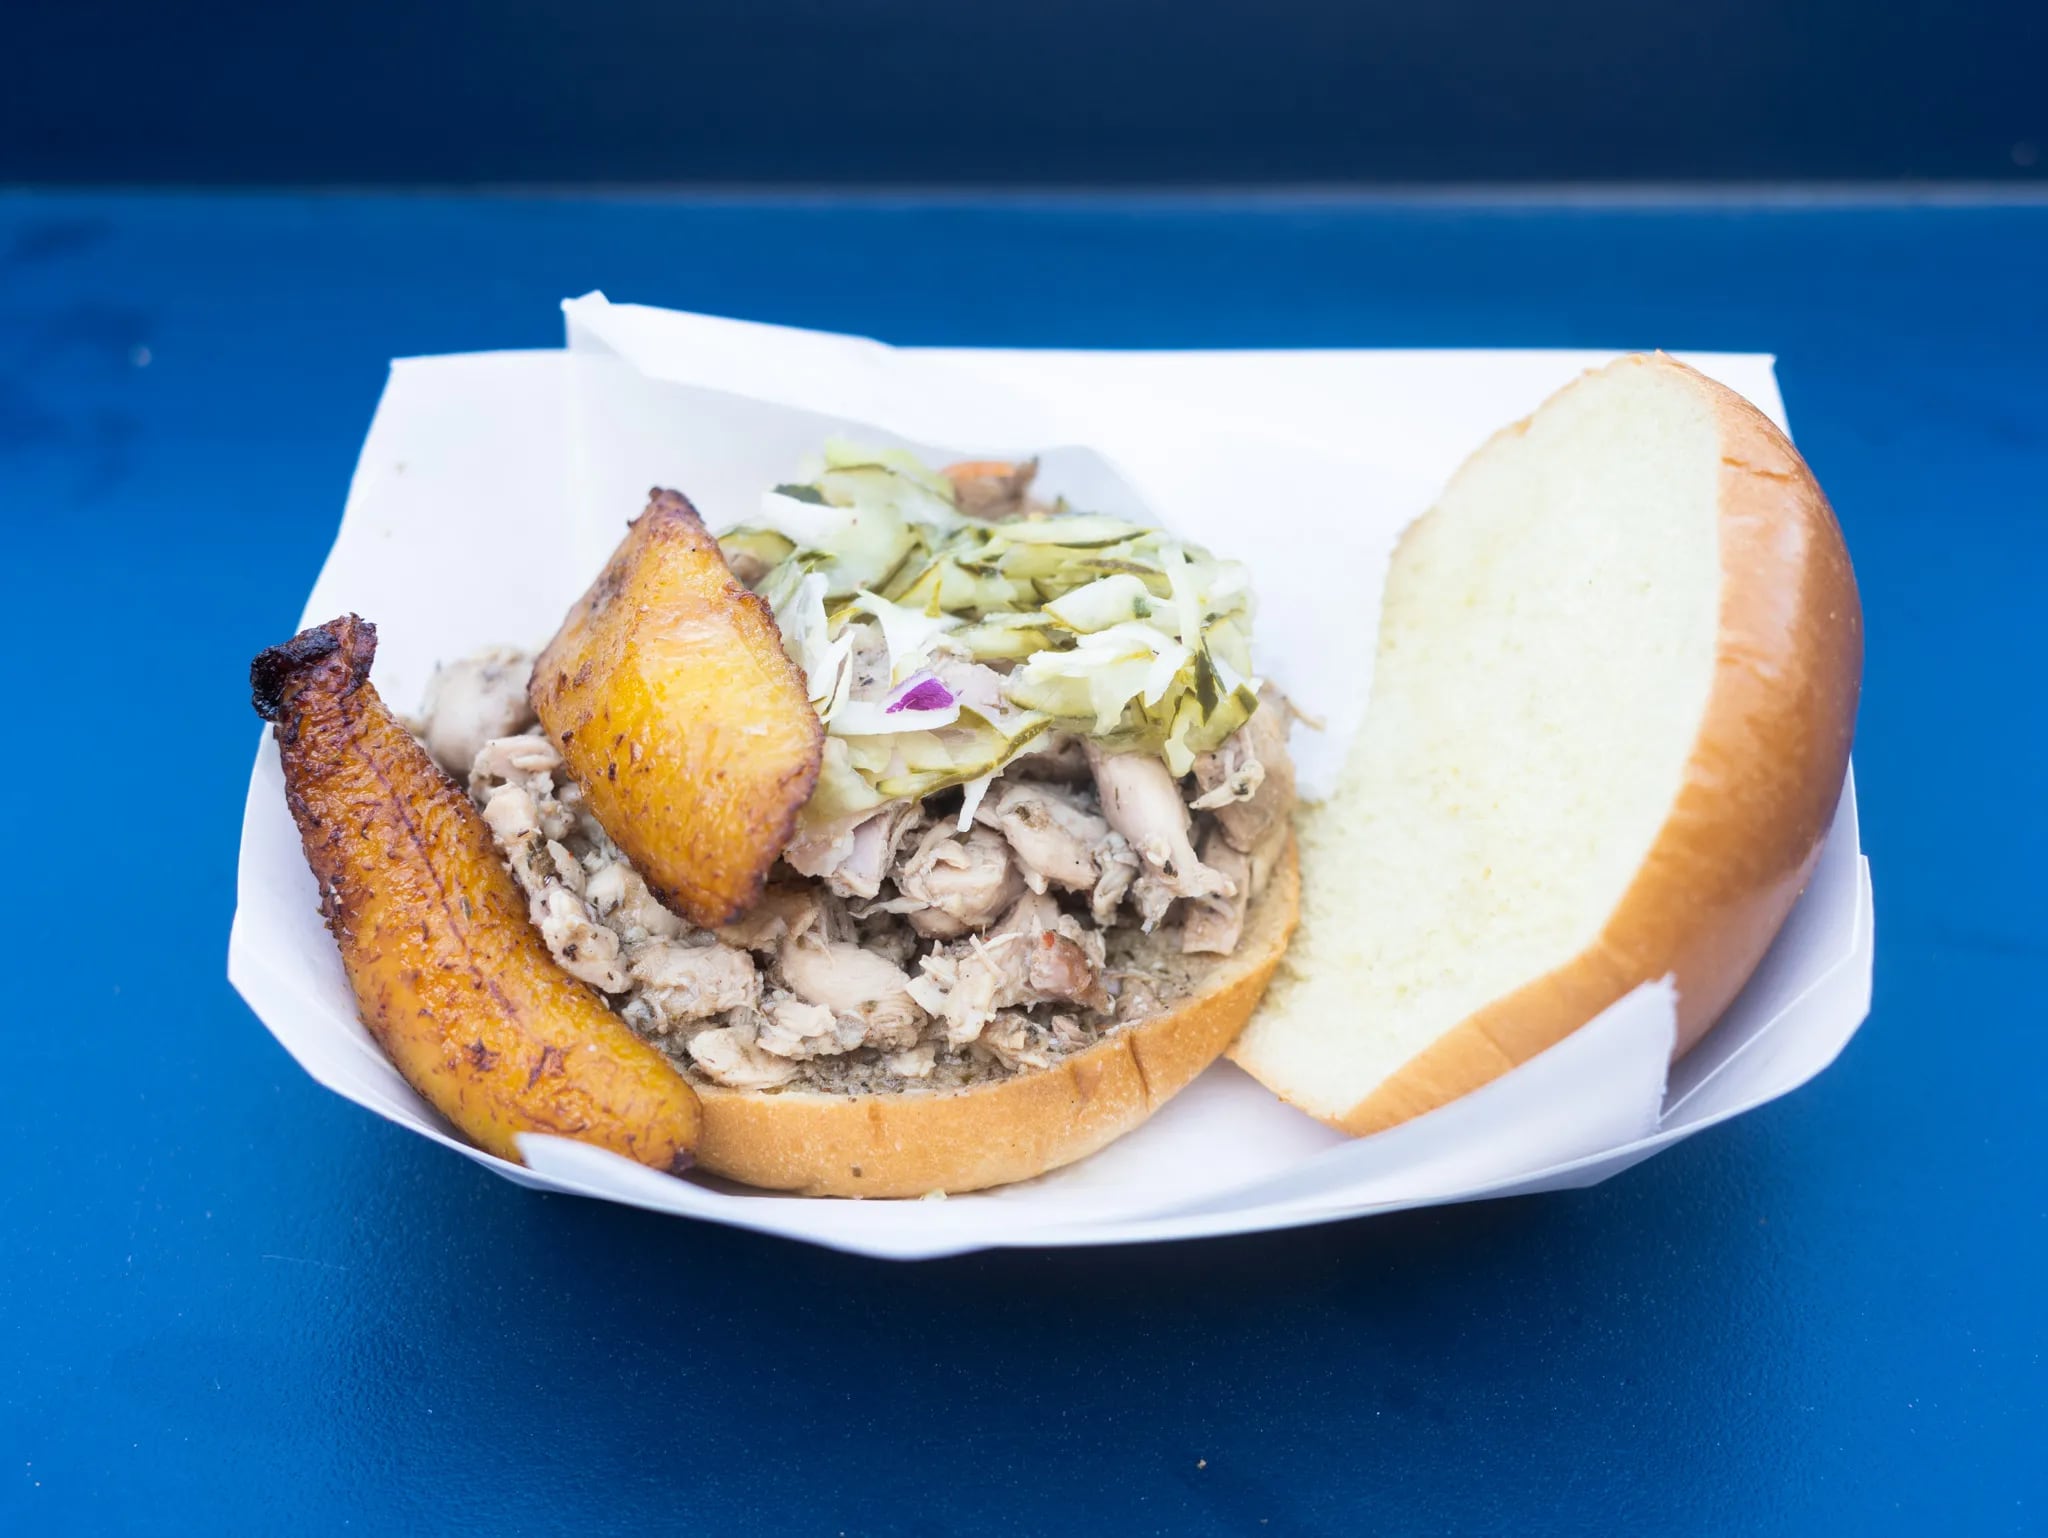 Jerk chicken sandwich from Bull's BBQ concession stand at Citizens Bank Park.